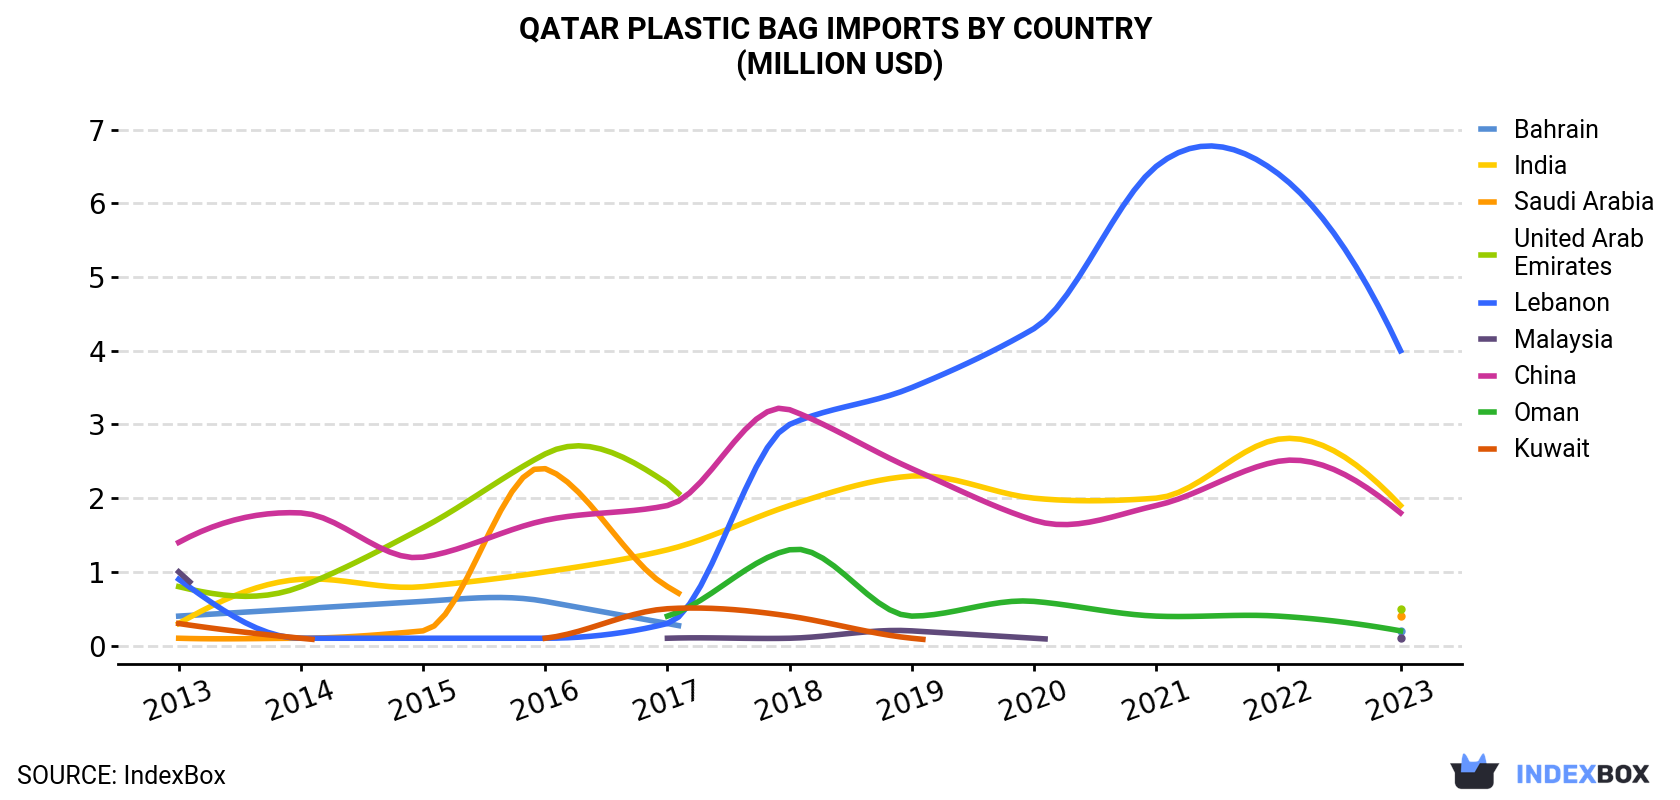 Qatar Plastic Bag Imports By Country (Million USD)